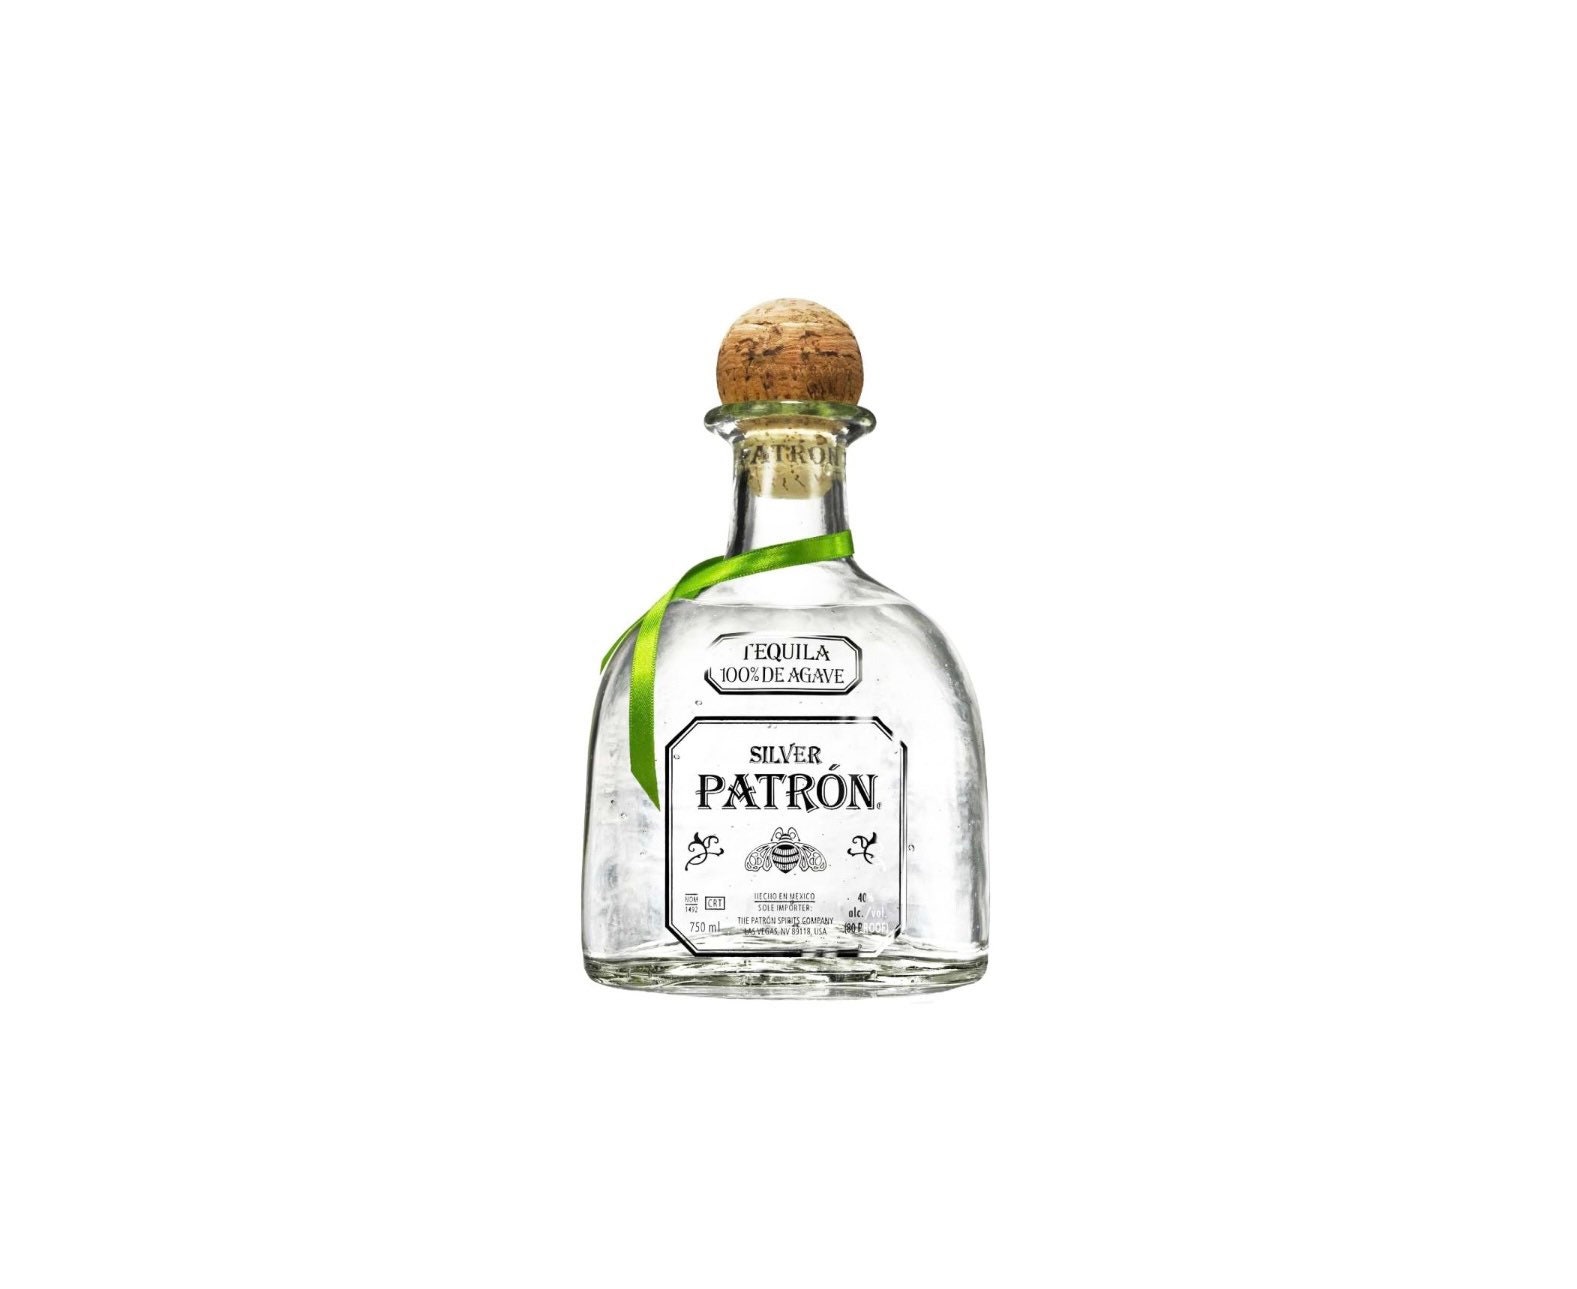 Patron tequila bottle sticker laminated glossy water | Etsy